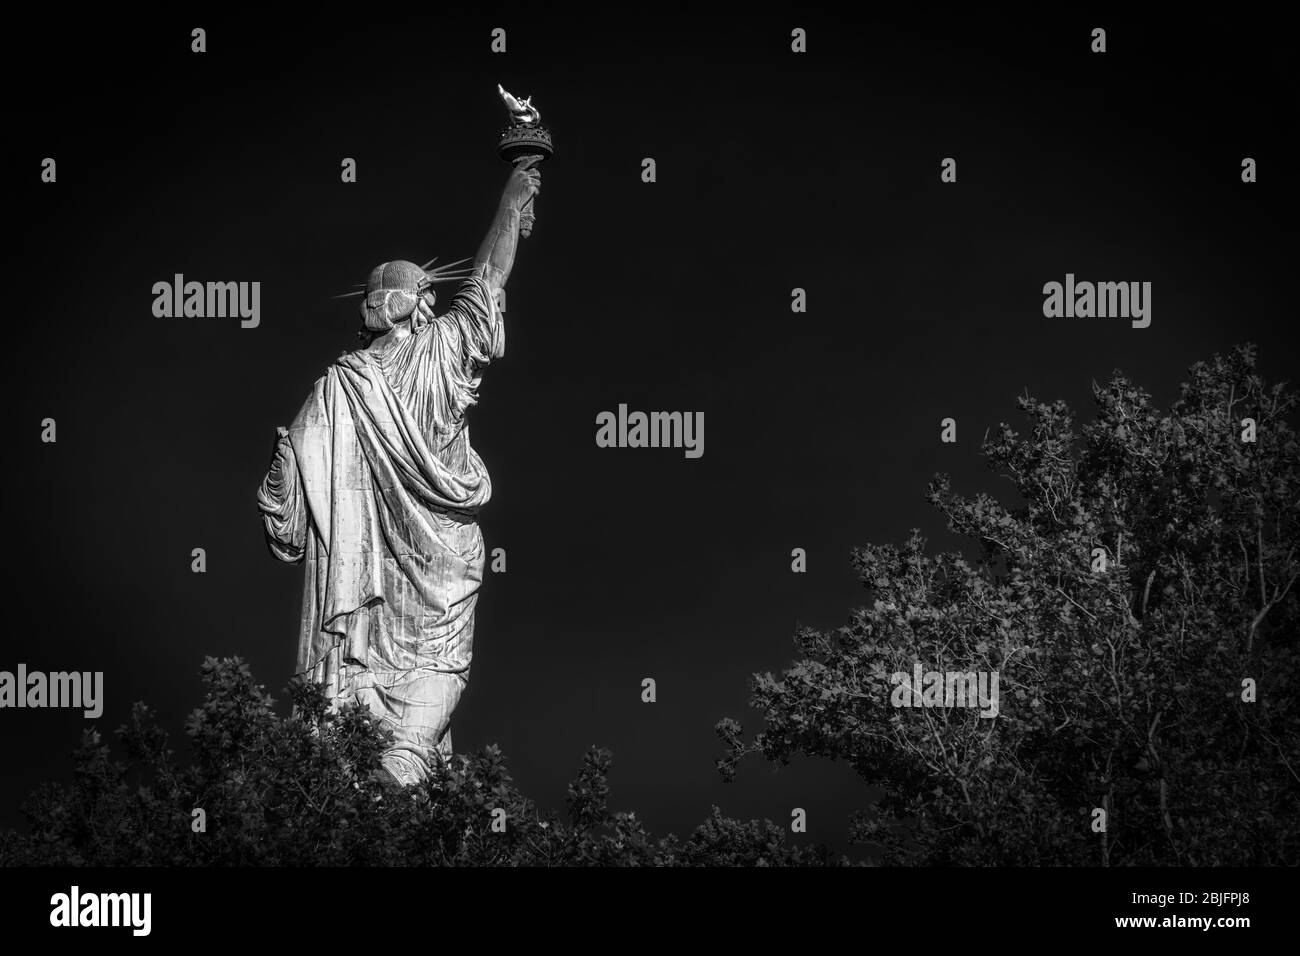 The view from behind the Statue of Liberty in New York City. Stock Photo